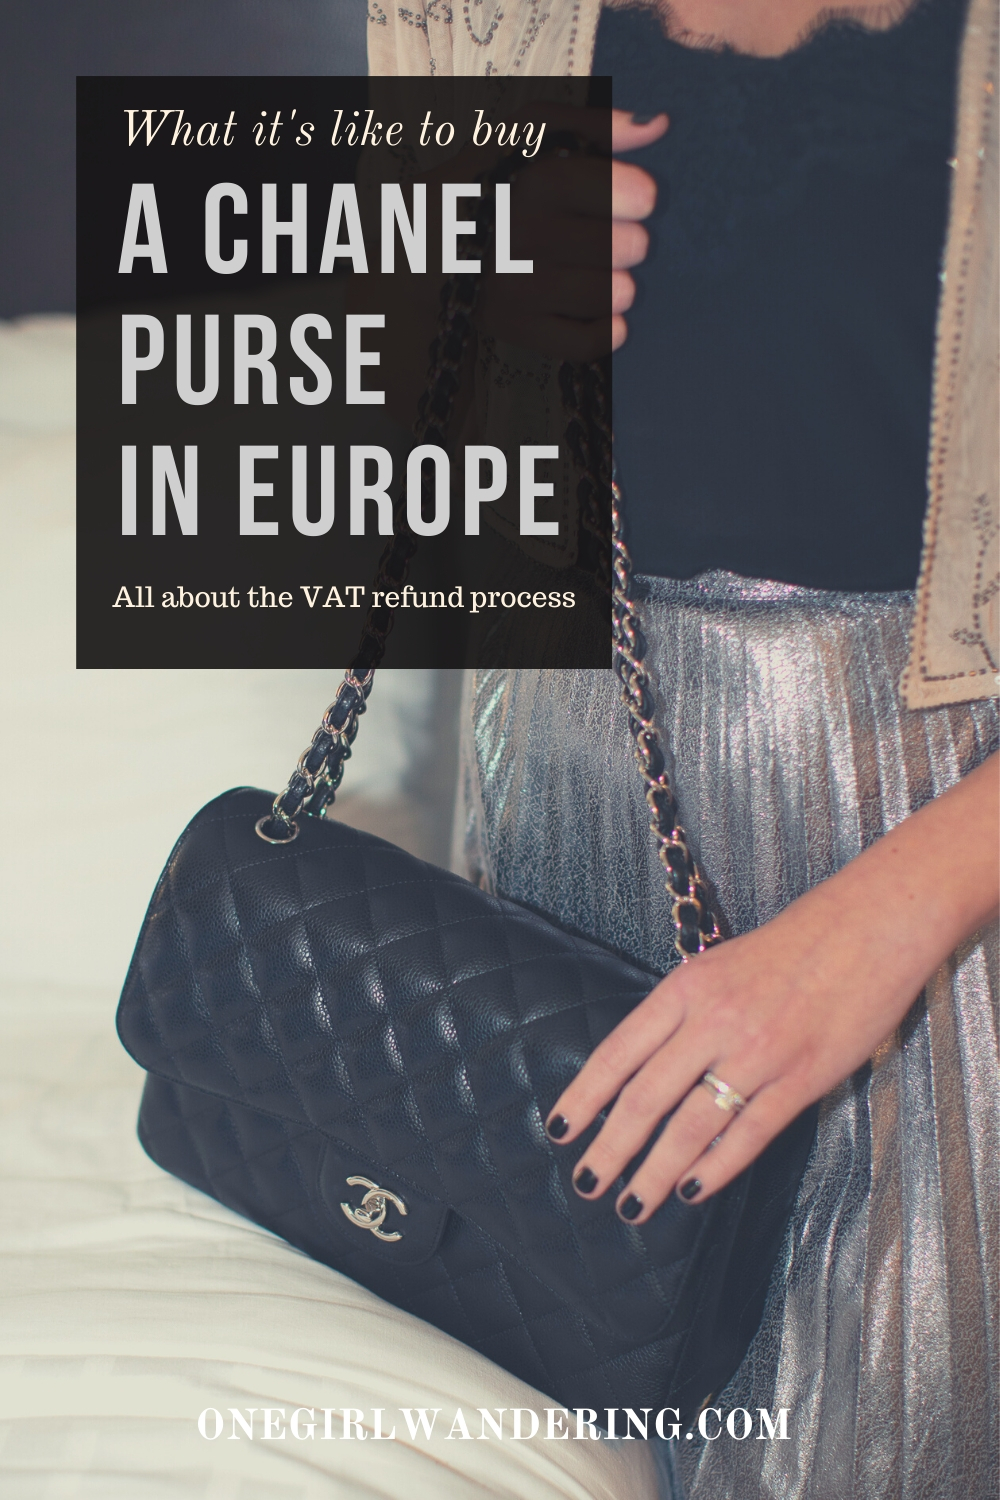 Have You Shopped in Europe in the Last Month? - PurseBlog